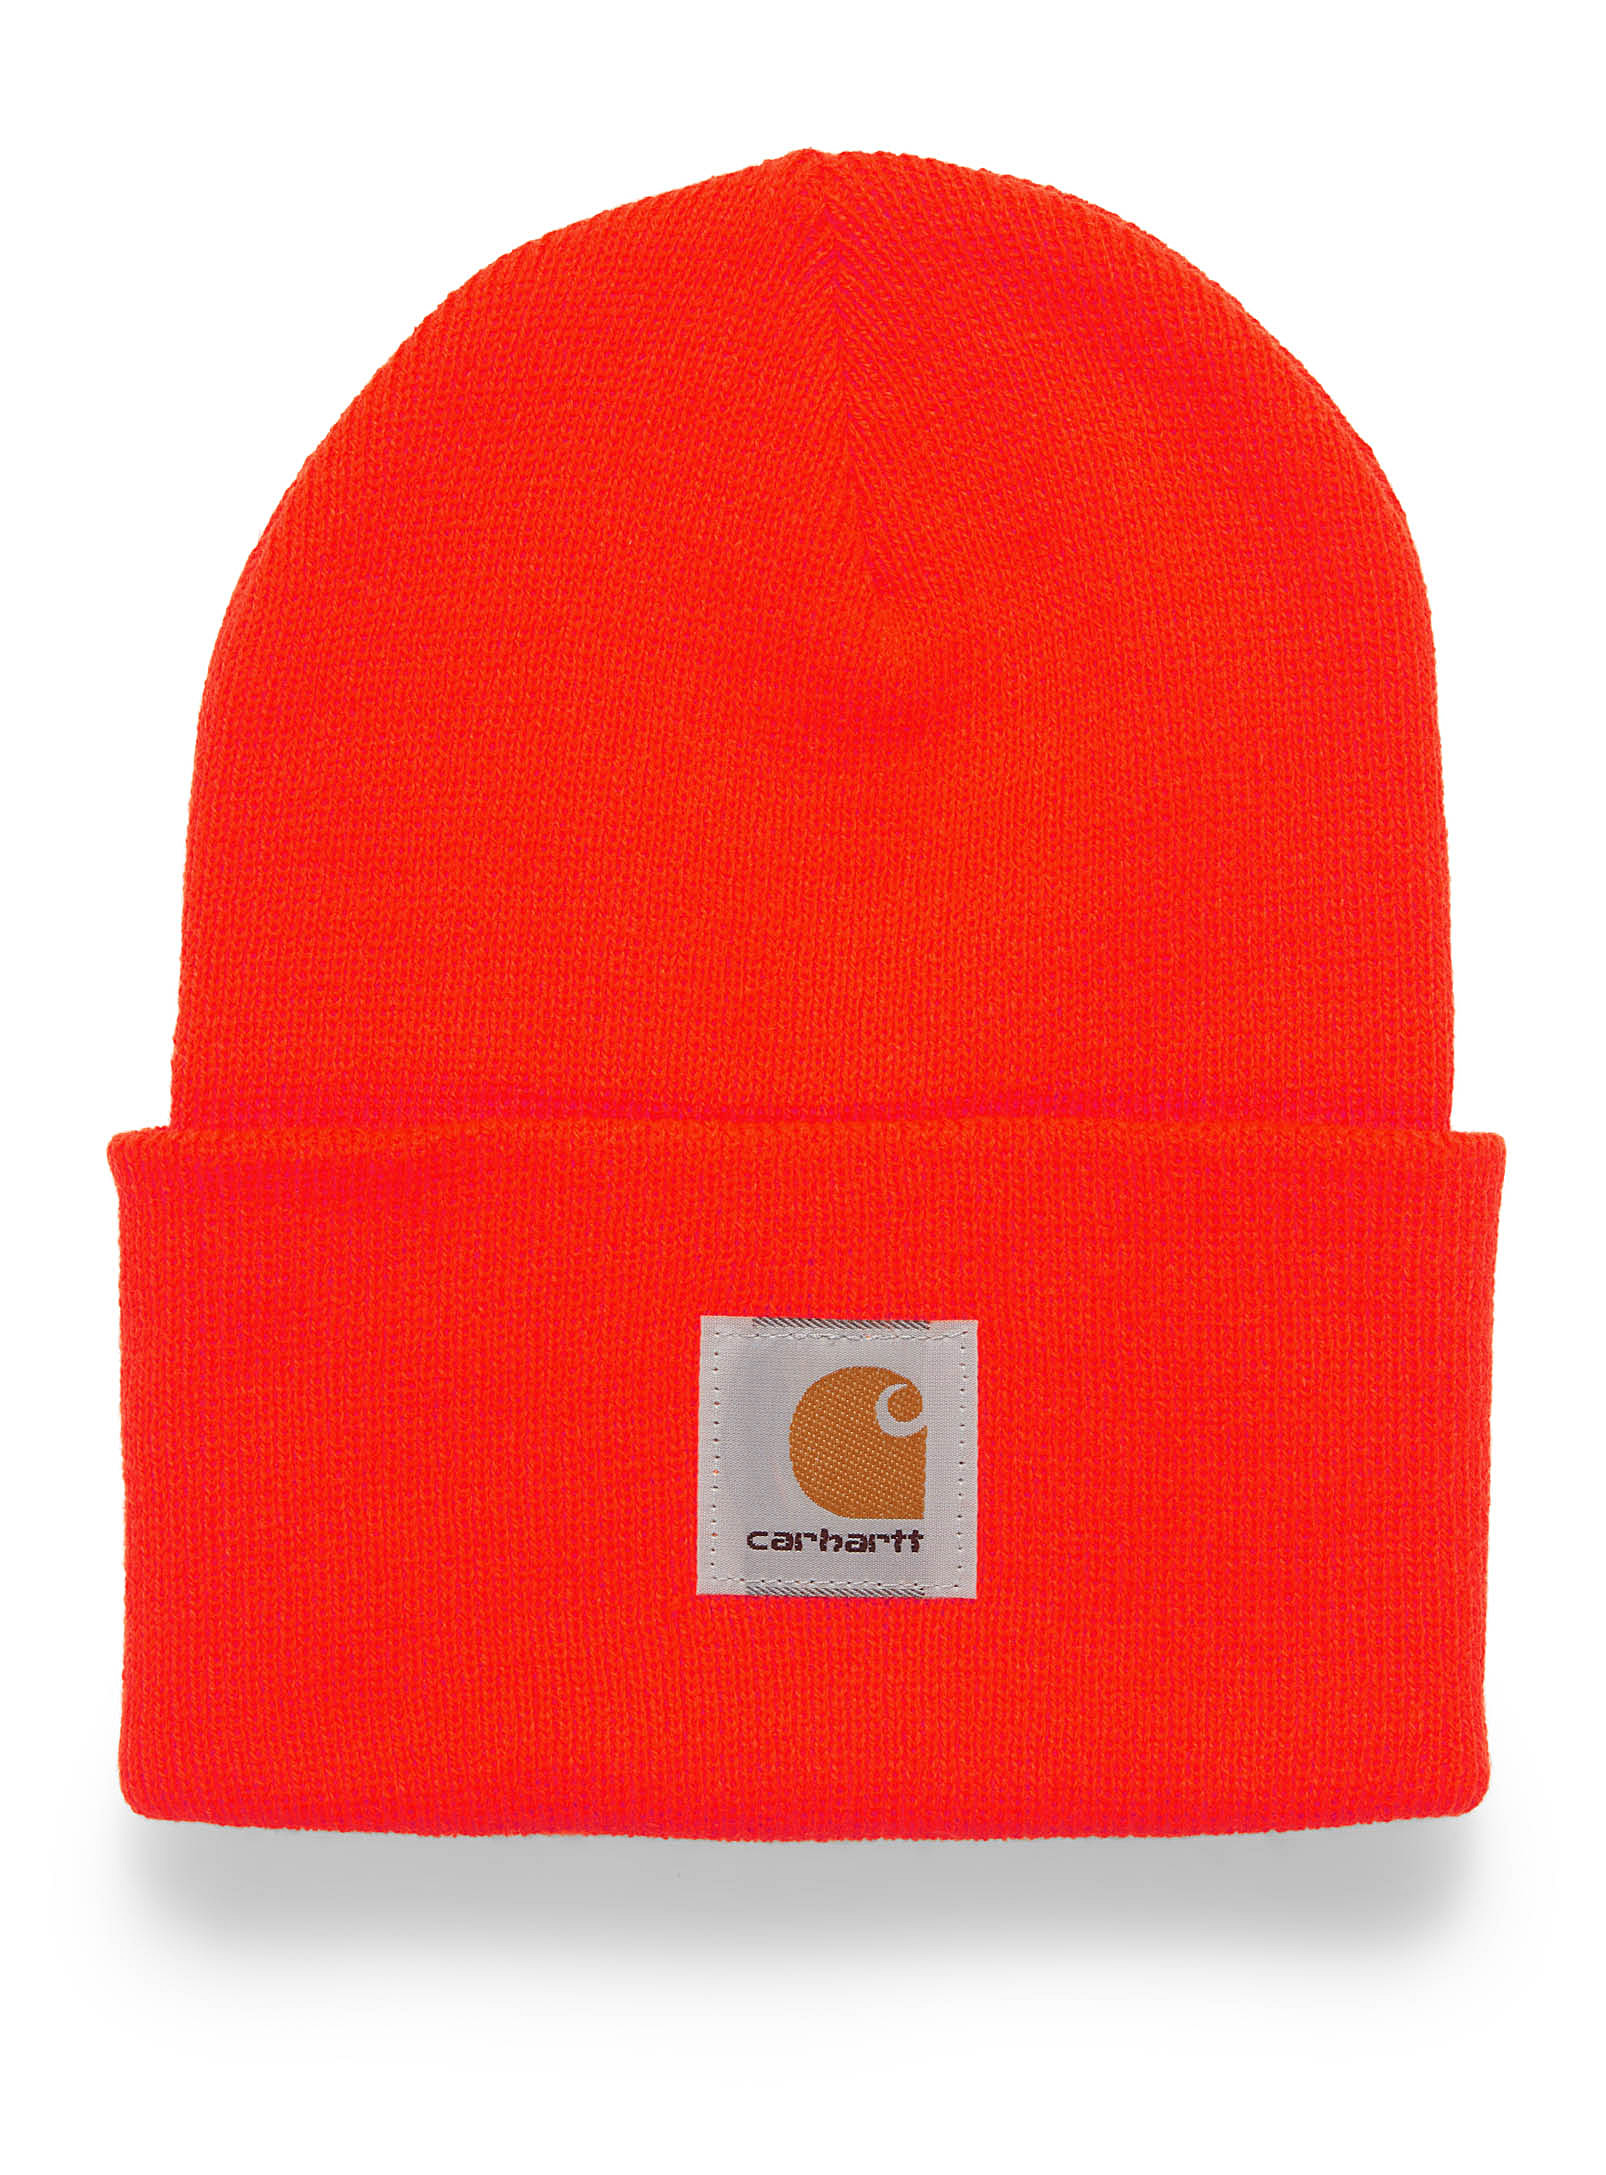 Carhartt Ribbed Worker Tuque In Orange